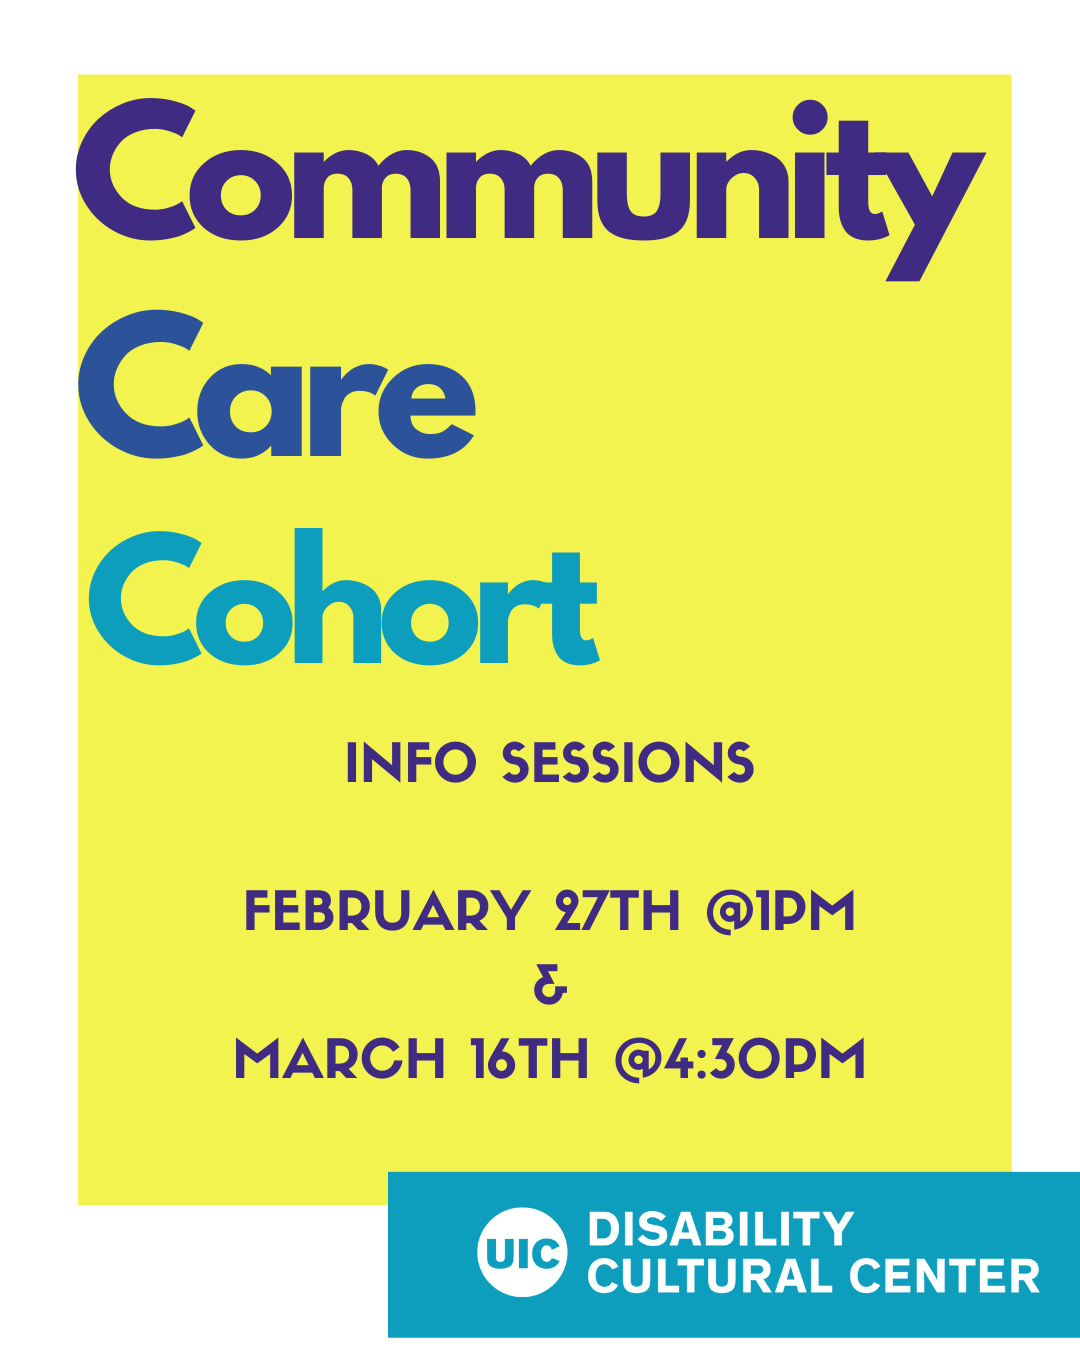 Community Care Cohort in purple and blue letters with info sessions below over a yellow background. Disability Cultural Center logo in Red, in lower right corner